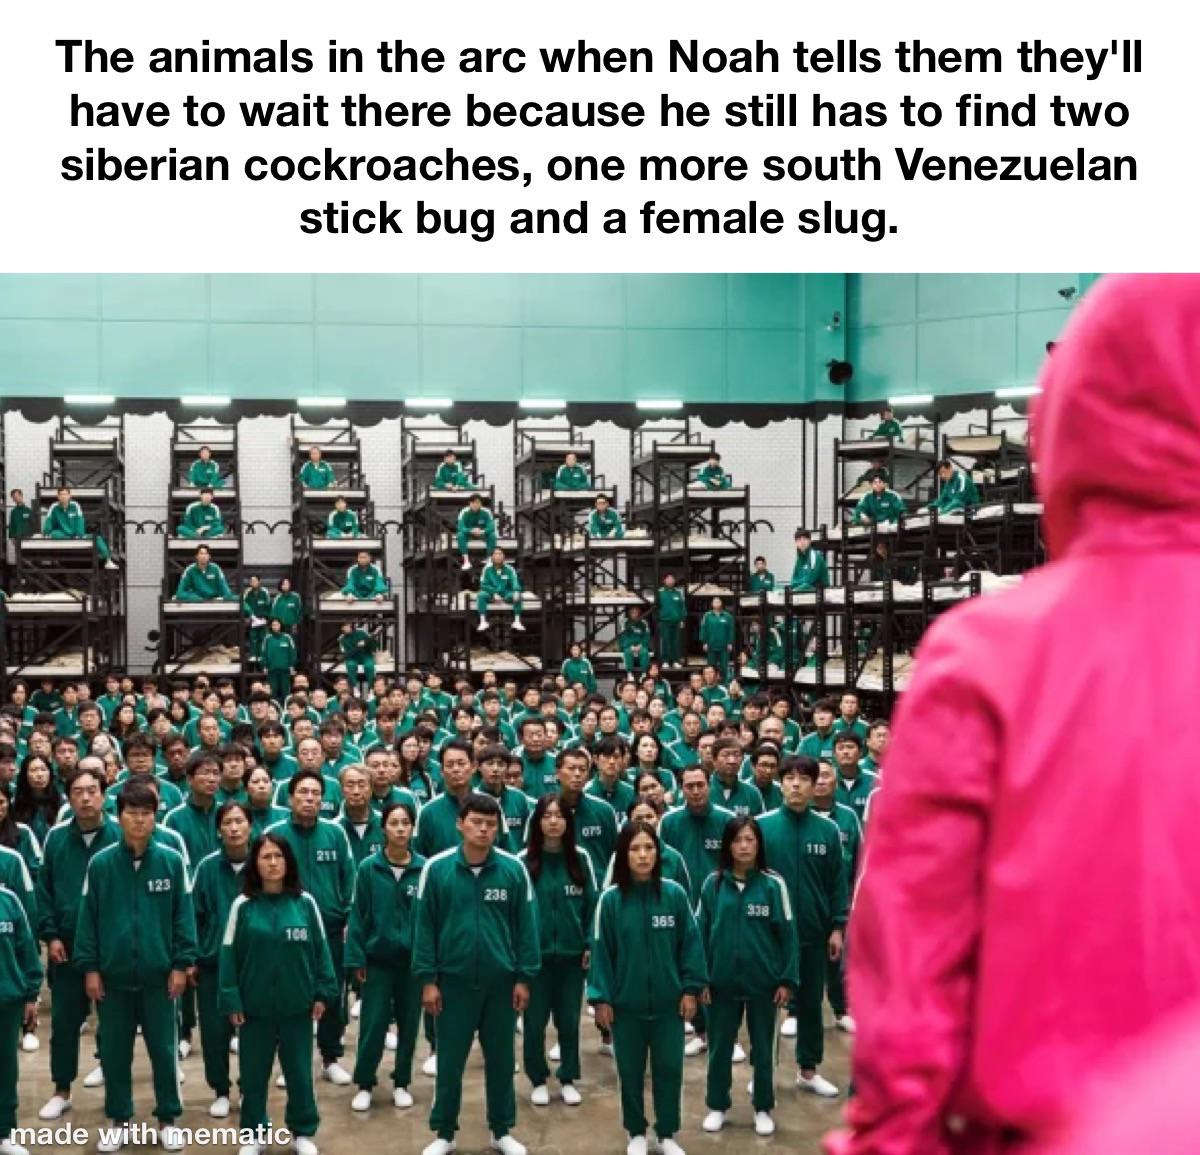 funny memes - squid game netflix - The animals in the arc when Noah tells them they'll have to wait there because he still has to find two siberian cockroaches, one more south Venezuelan stick bug and a female slug. Or 118 291 123 238 10 358 365 108 made 